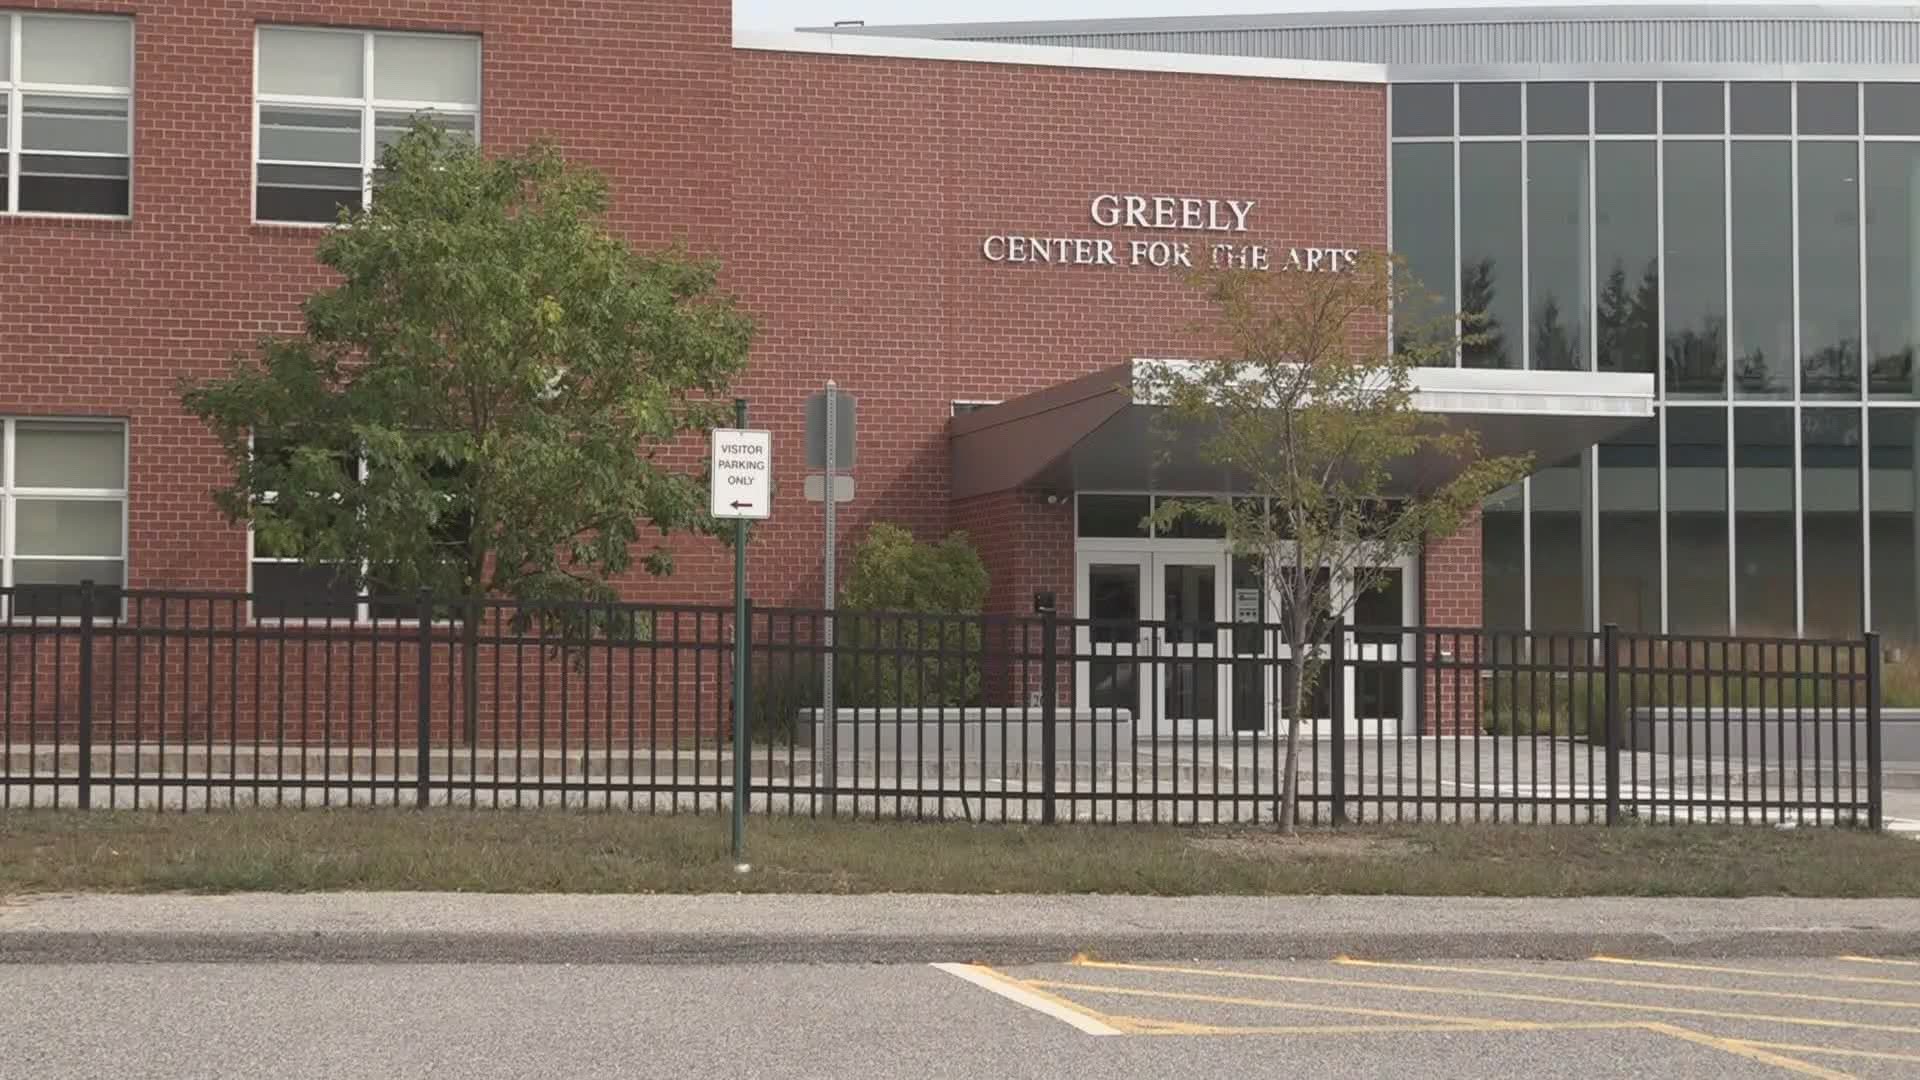 The online threat that closed Greely High School for a day last week came from a teenager in Tennessee.